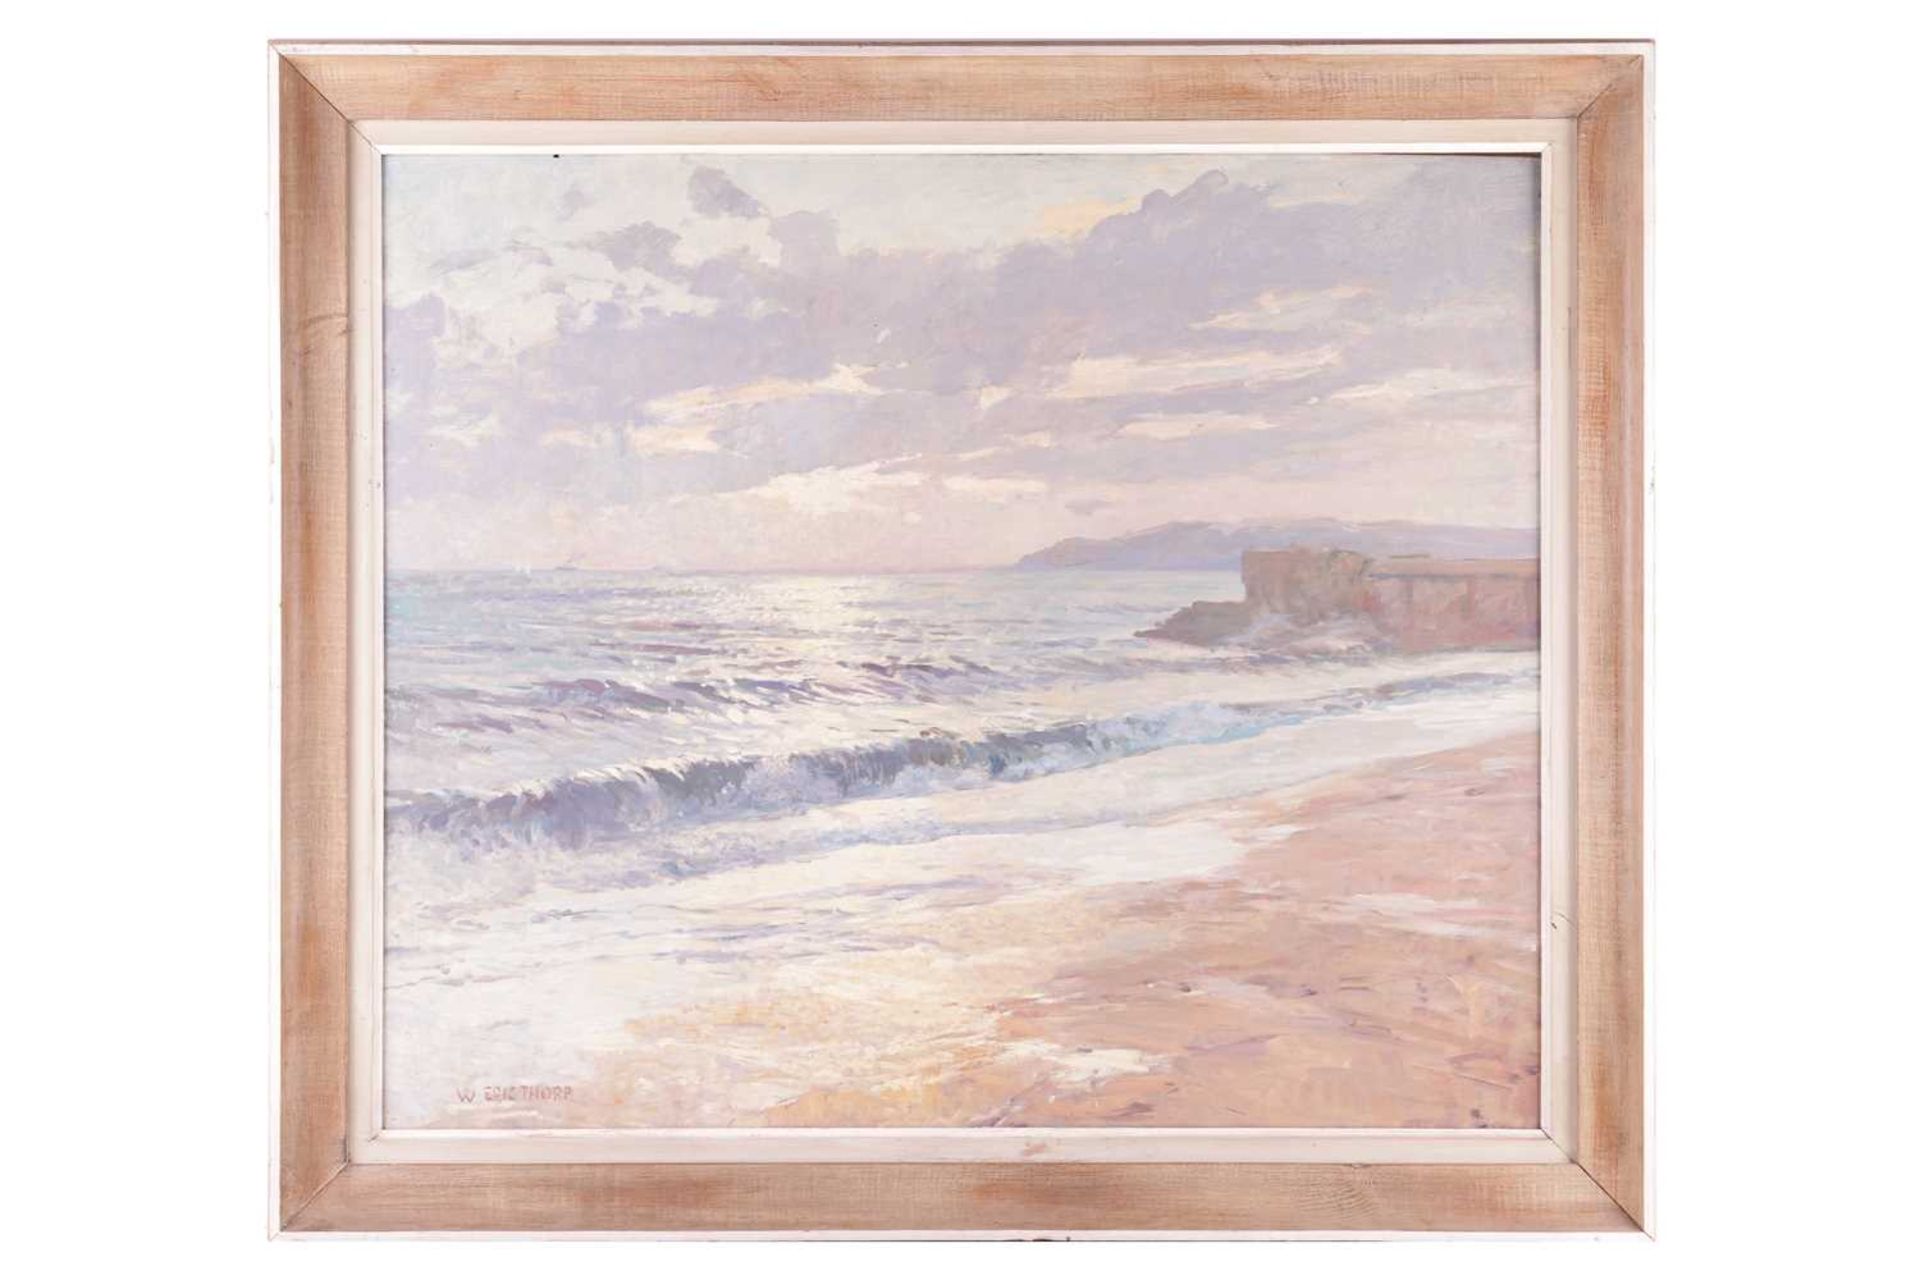 William Eric Thorp (1901 - 1993), 'The Breaking Wave', signed 'W. Eric Throp' (lower left), oil on b